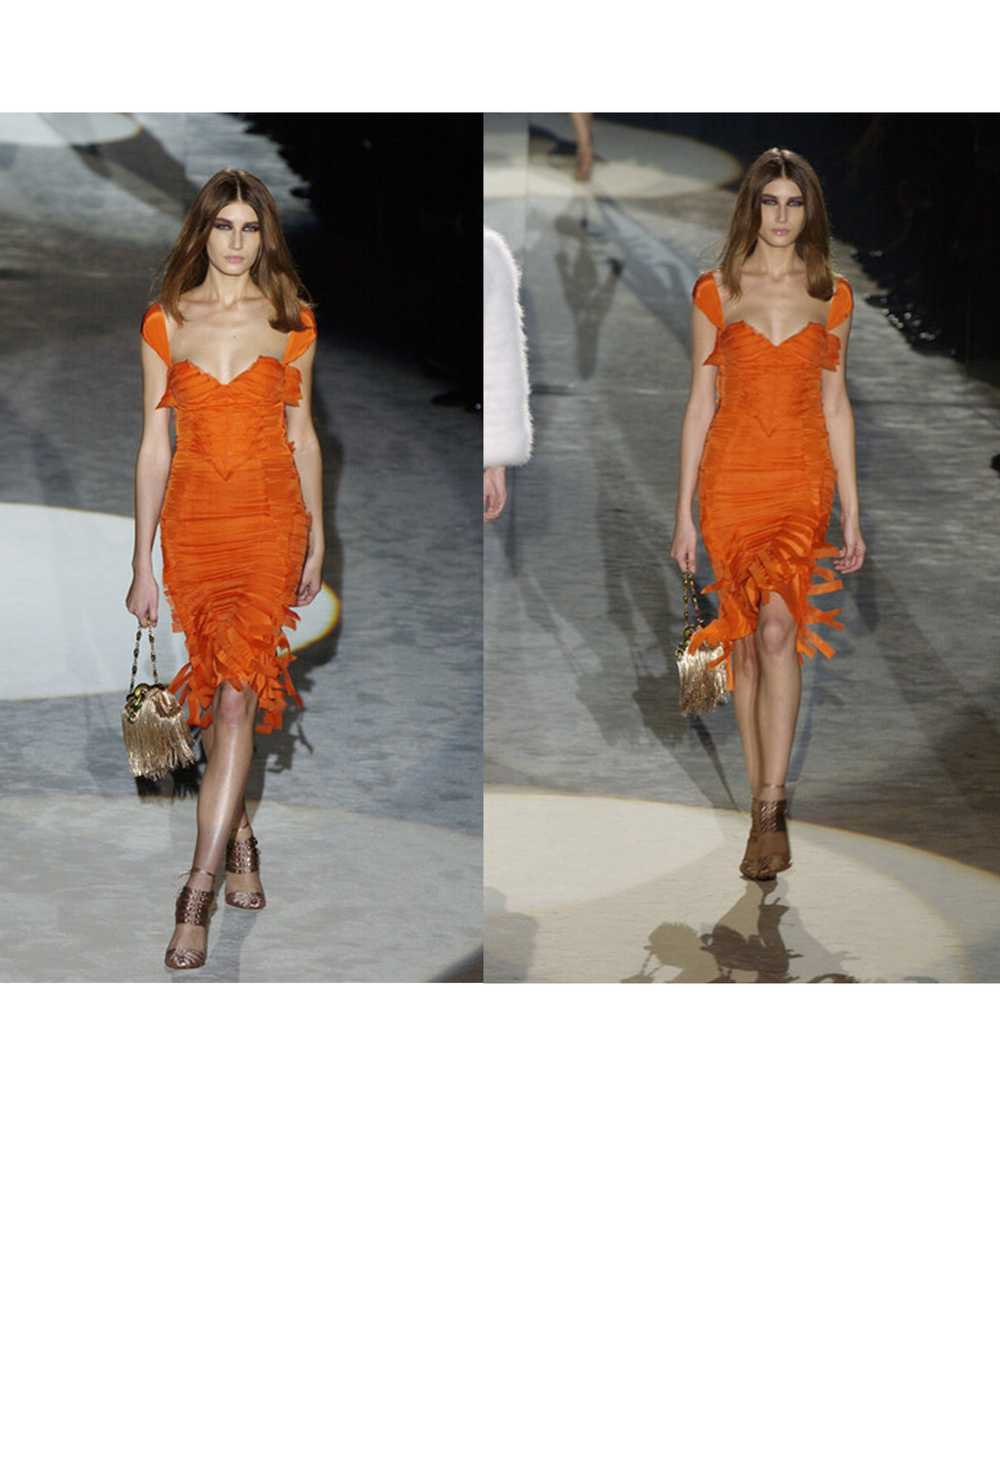 GUCCI BY TOM FORD ORANGE SILK COCKTAIL DRESS 2004 - image 2